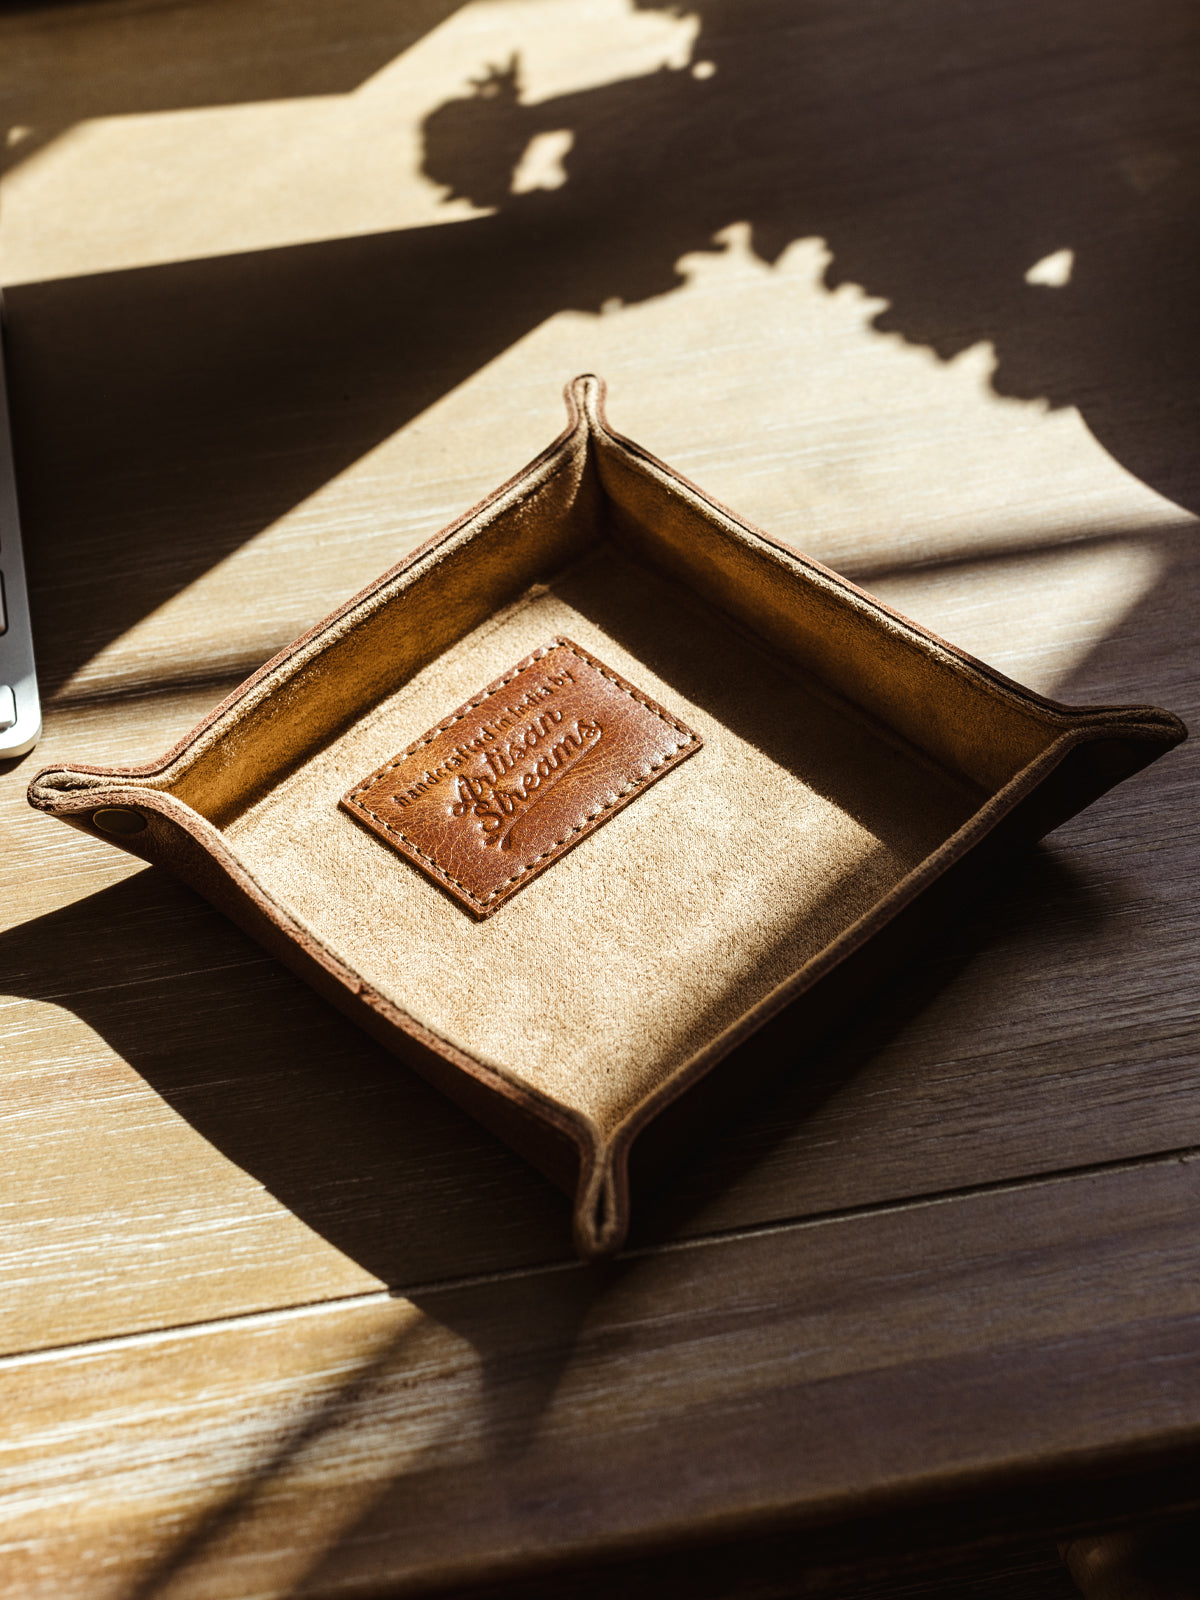 Small leather valet tray on wooden table.